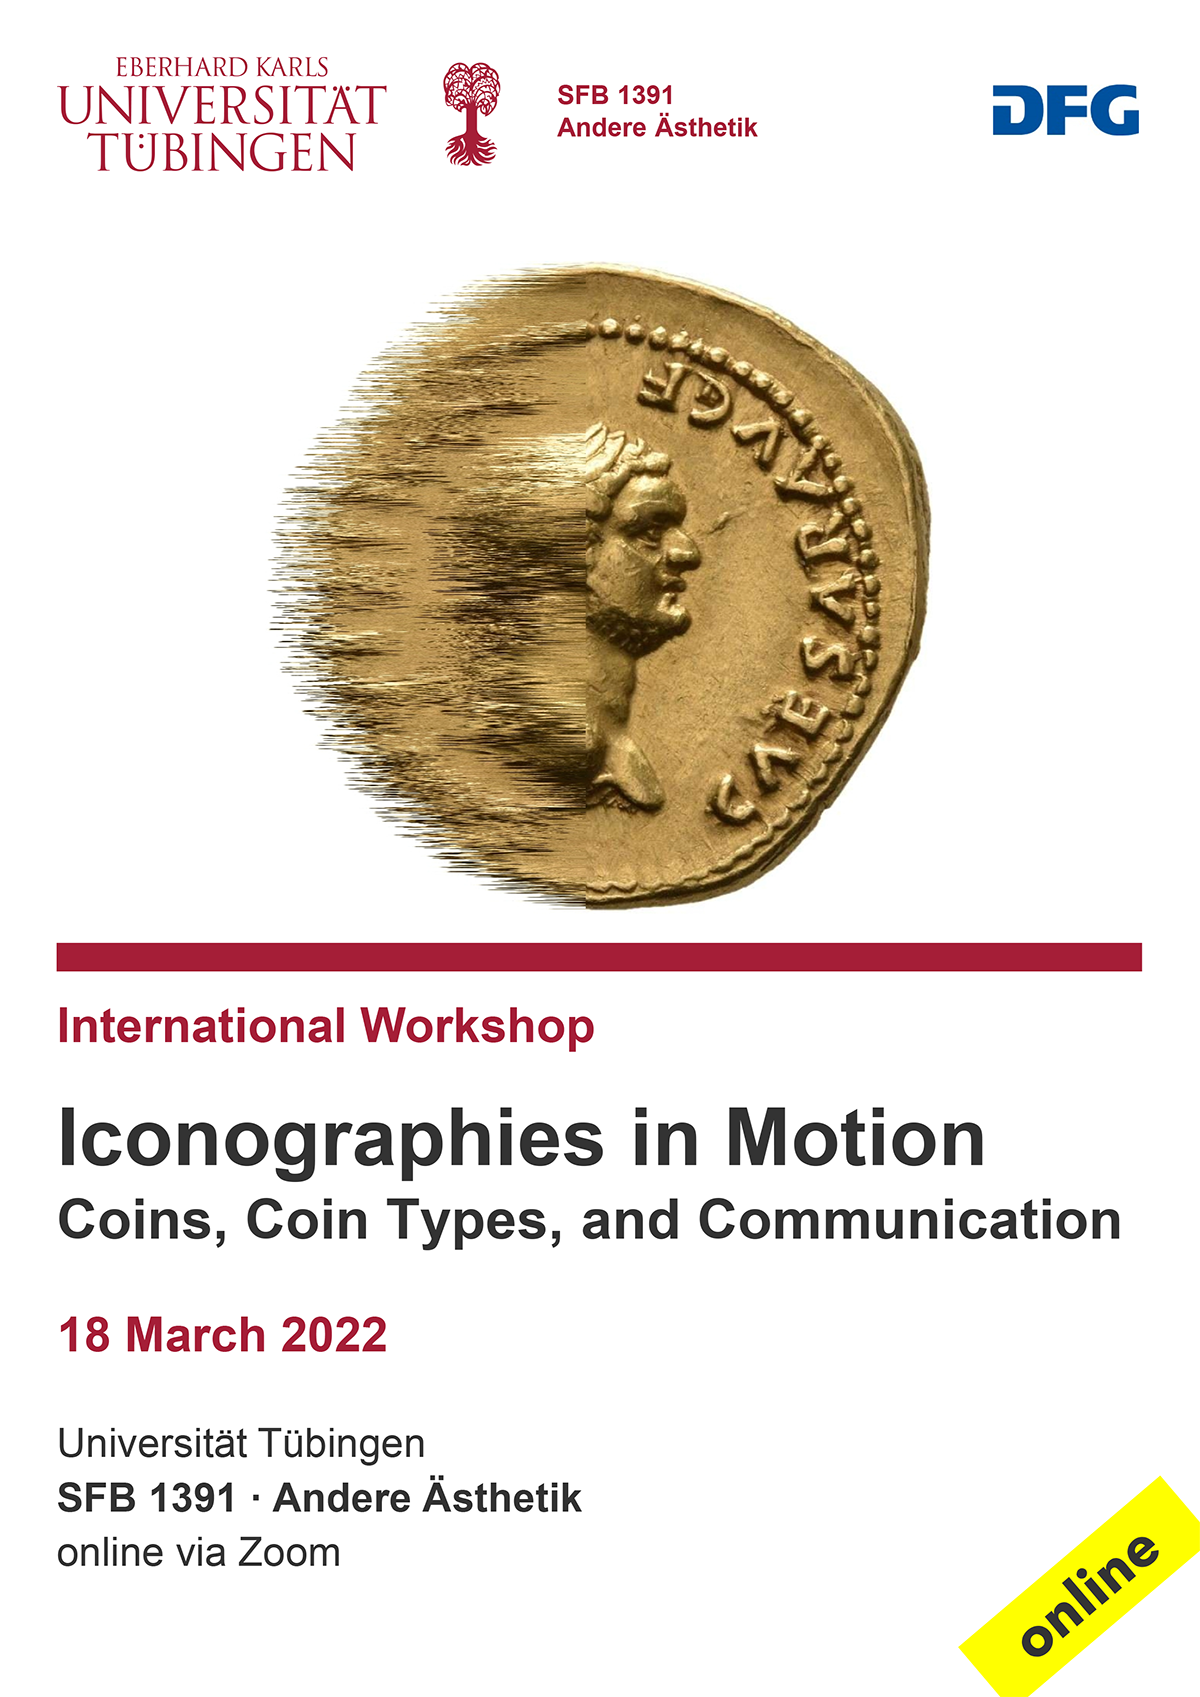 Iconographies in Motion